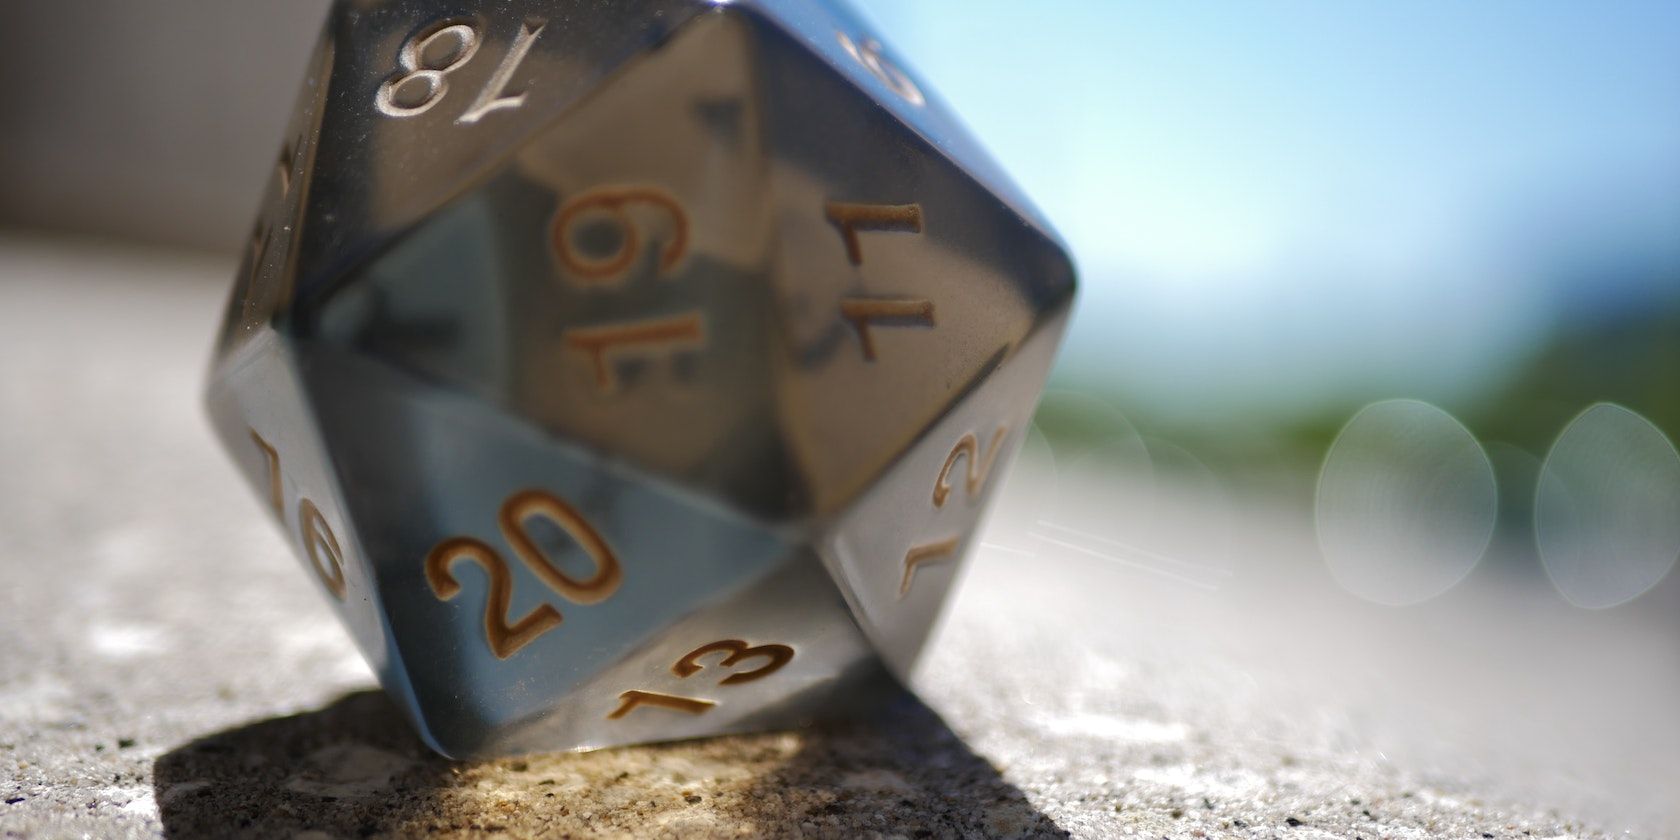 Translucent d20 die on a grainy surface